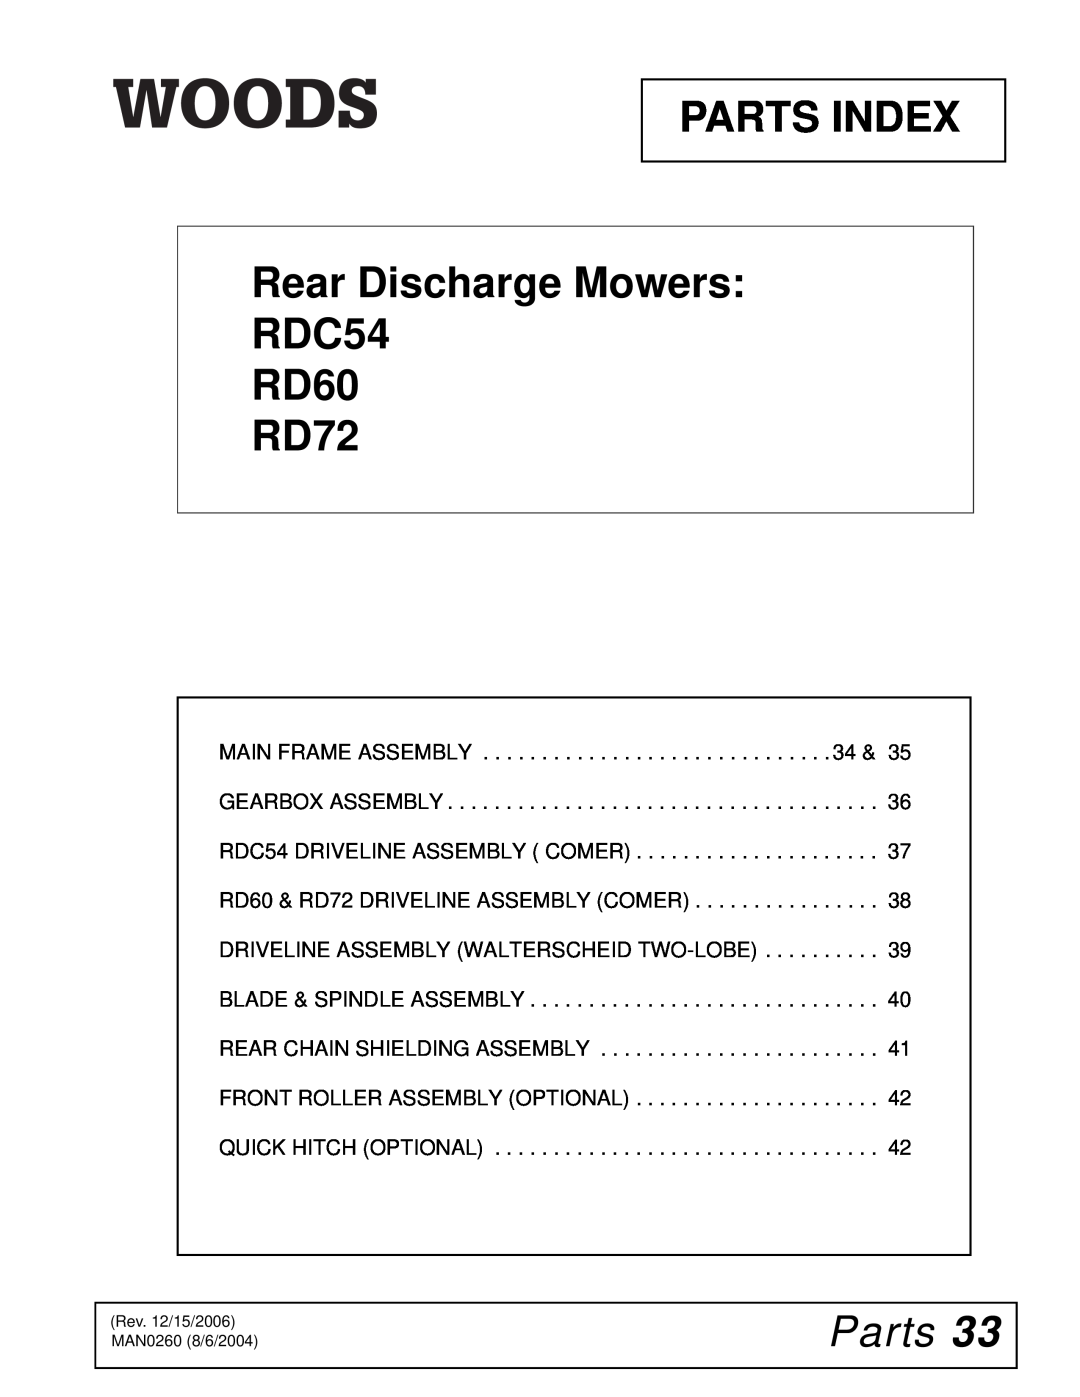 Woods Equipment manual PARTS INDEX Rear Discharge Mowers RDC54 RD60 RD72, Parts 